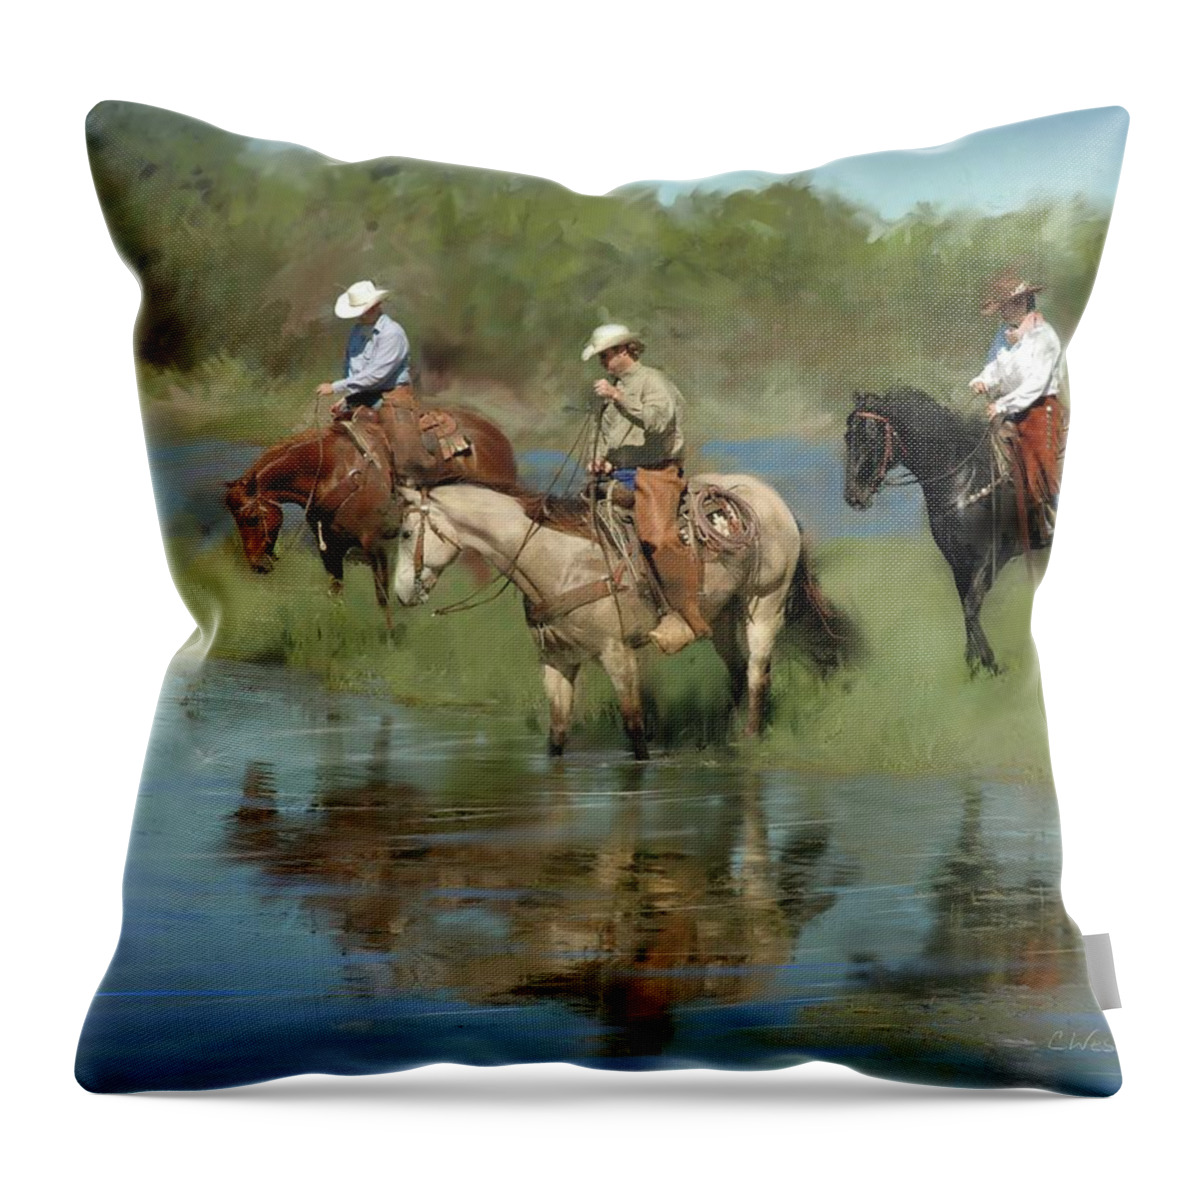 Cowboys Throw Pillow featuring the digital art Watering Hole by Cynthia Westbrook